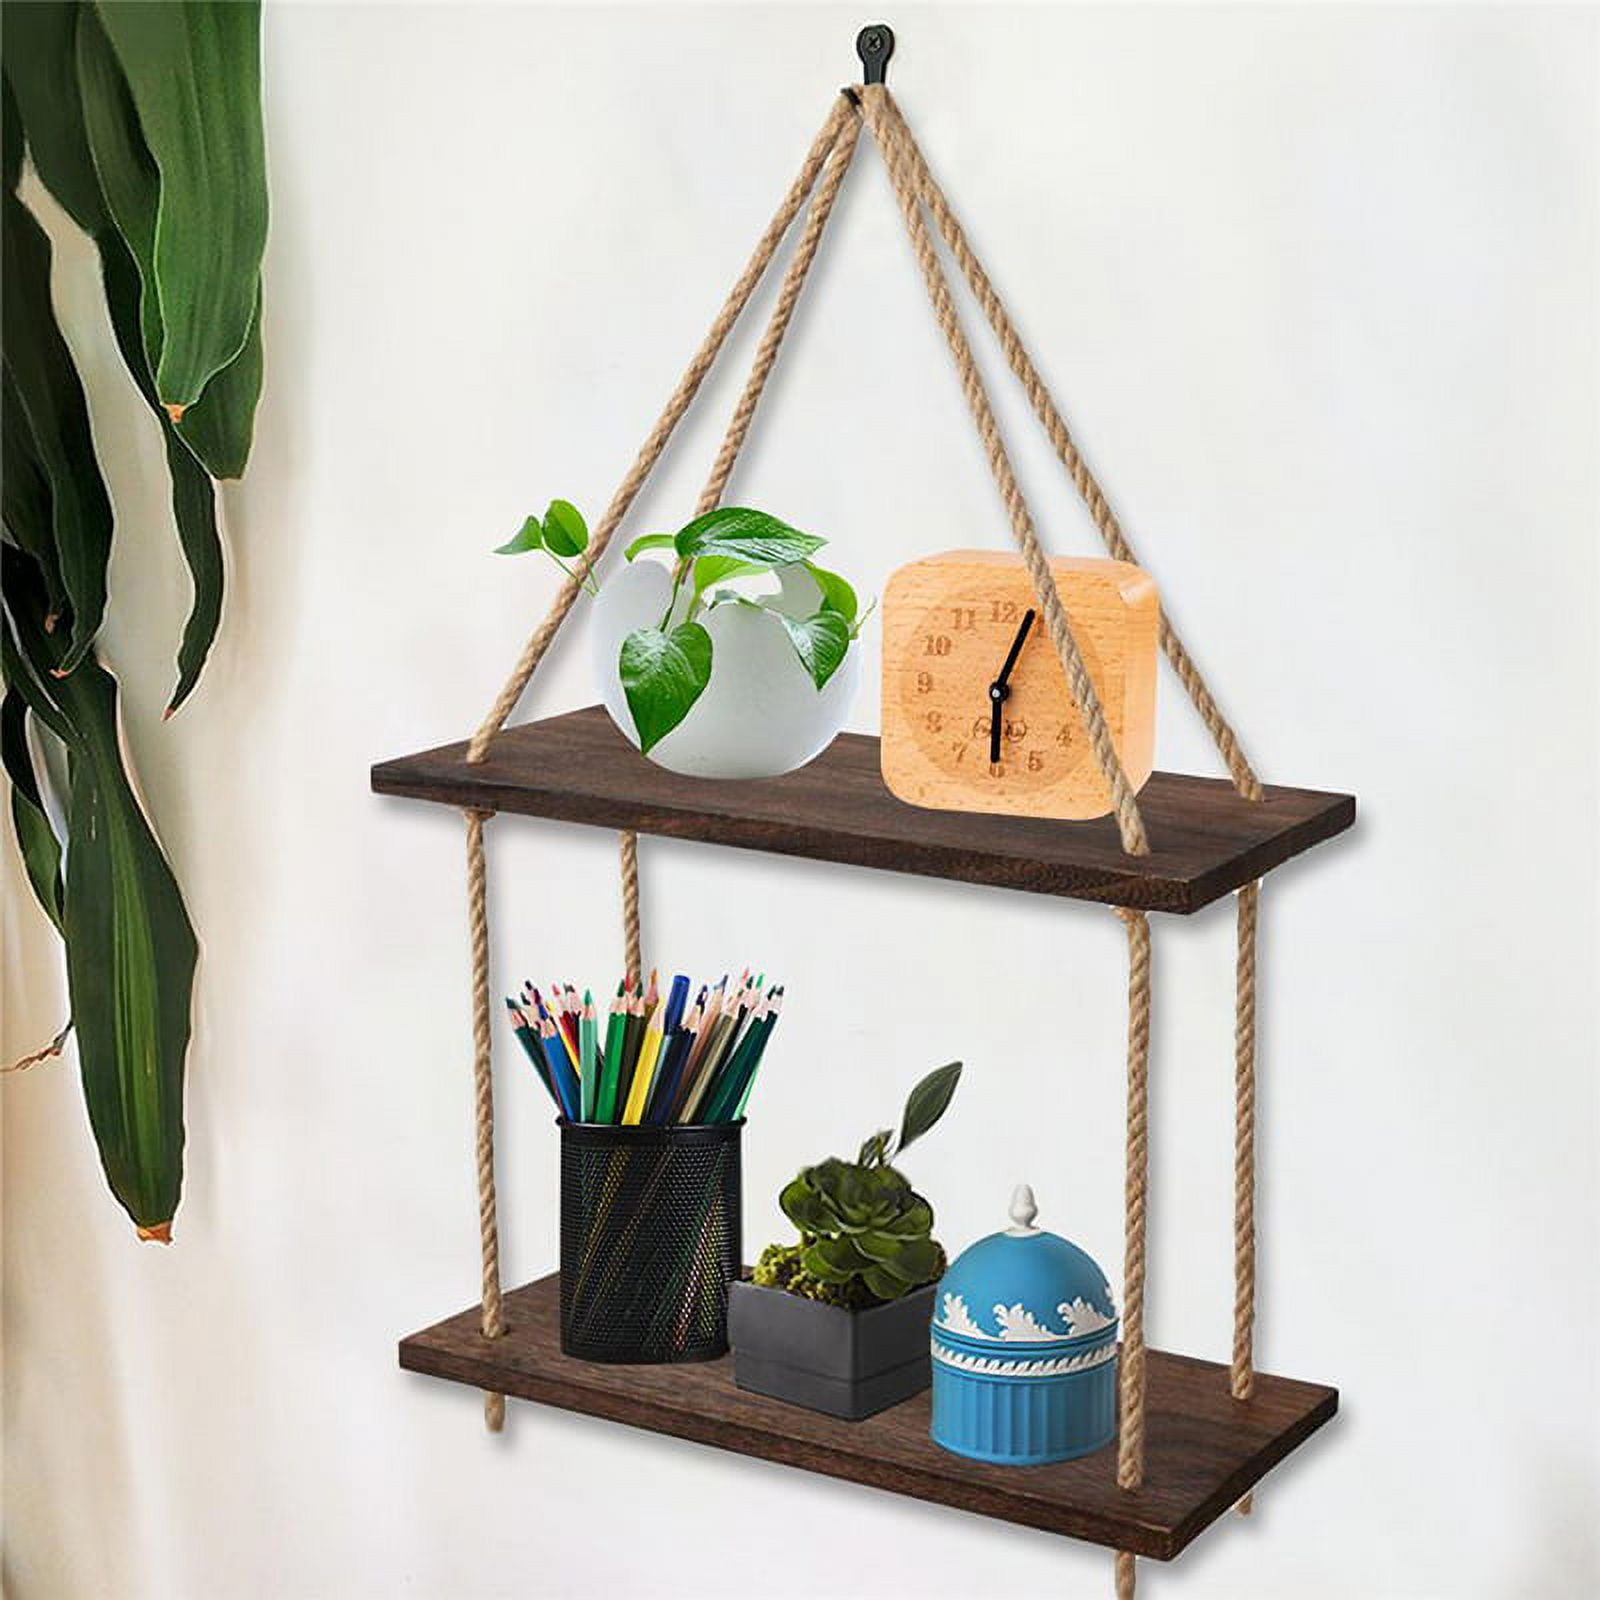 Wooden Hanging Shelf Window Wall Plant Rope Hanging Shelves For